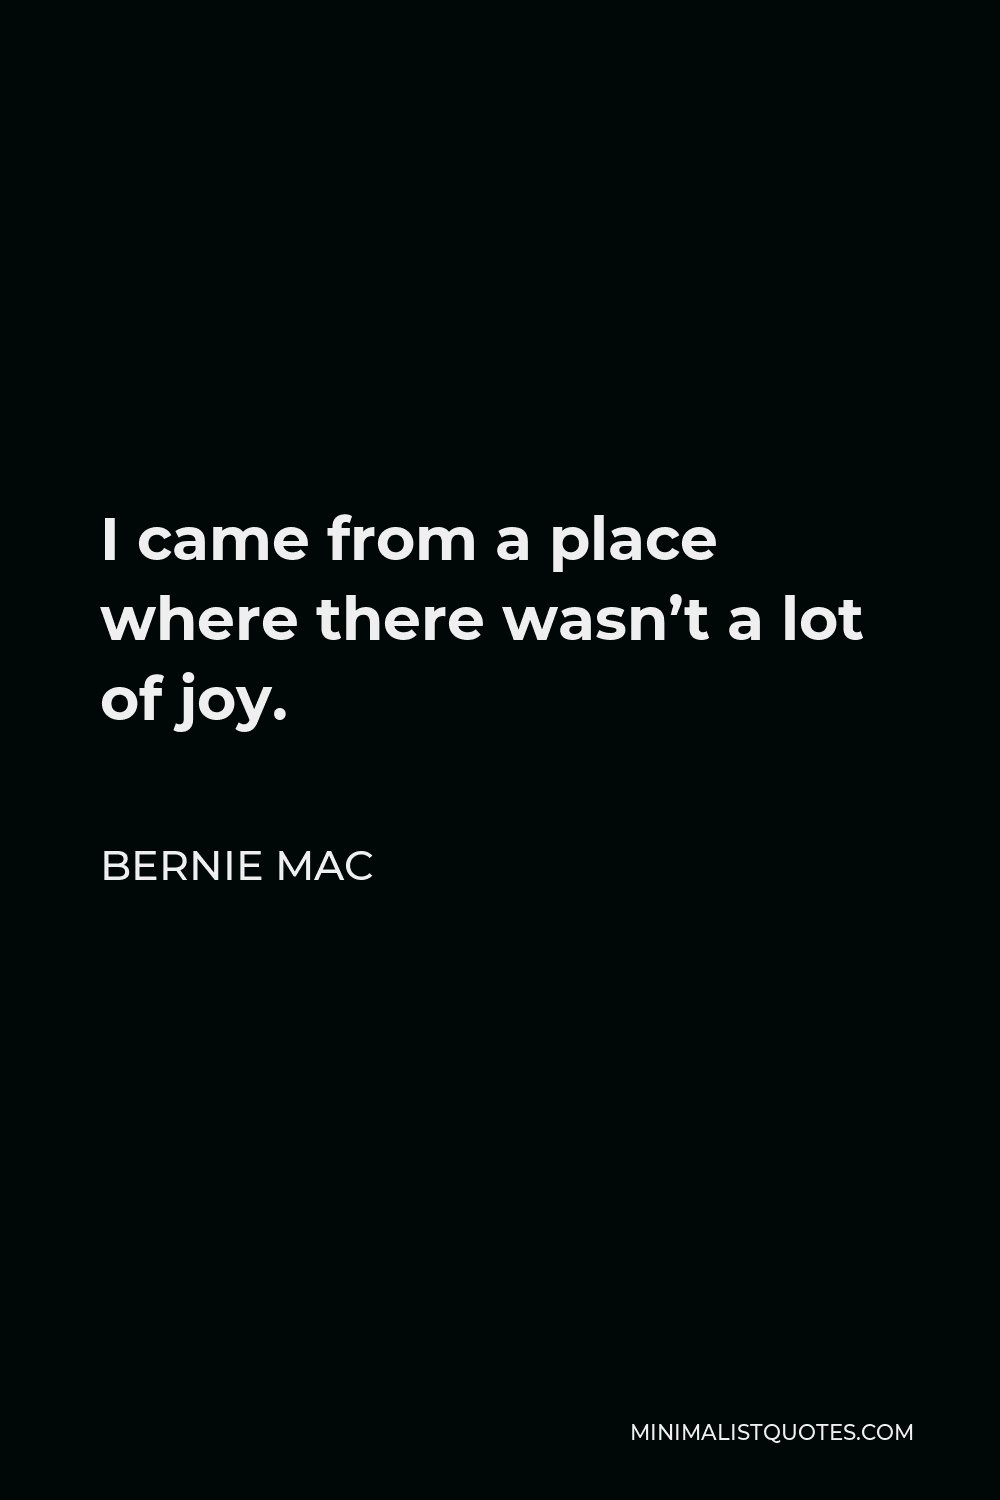 Bernie Mac Quote - I came from a place where there wasn’t a lot of joy.